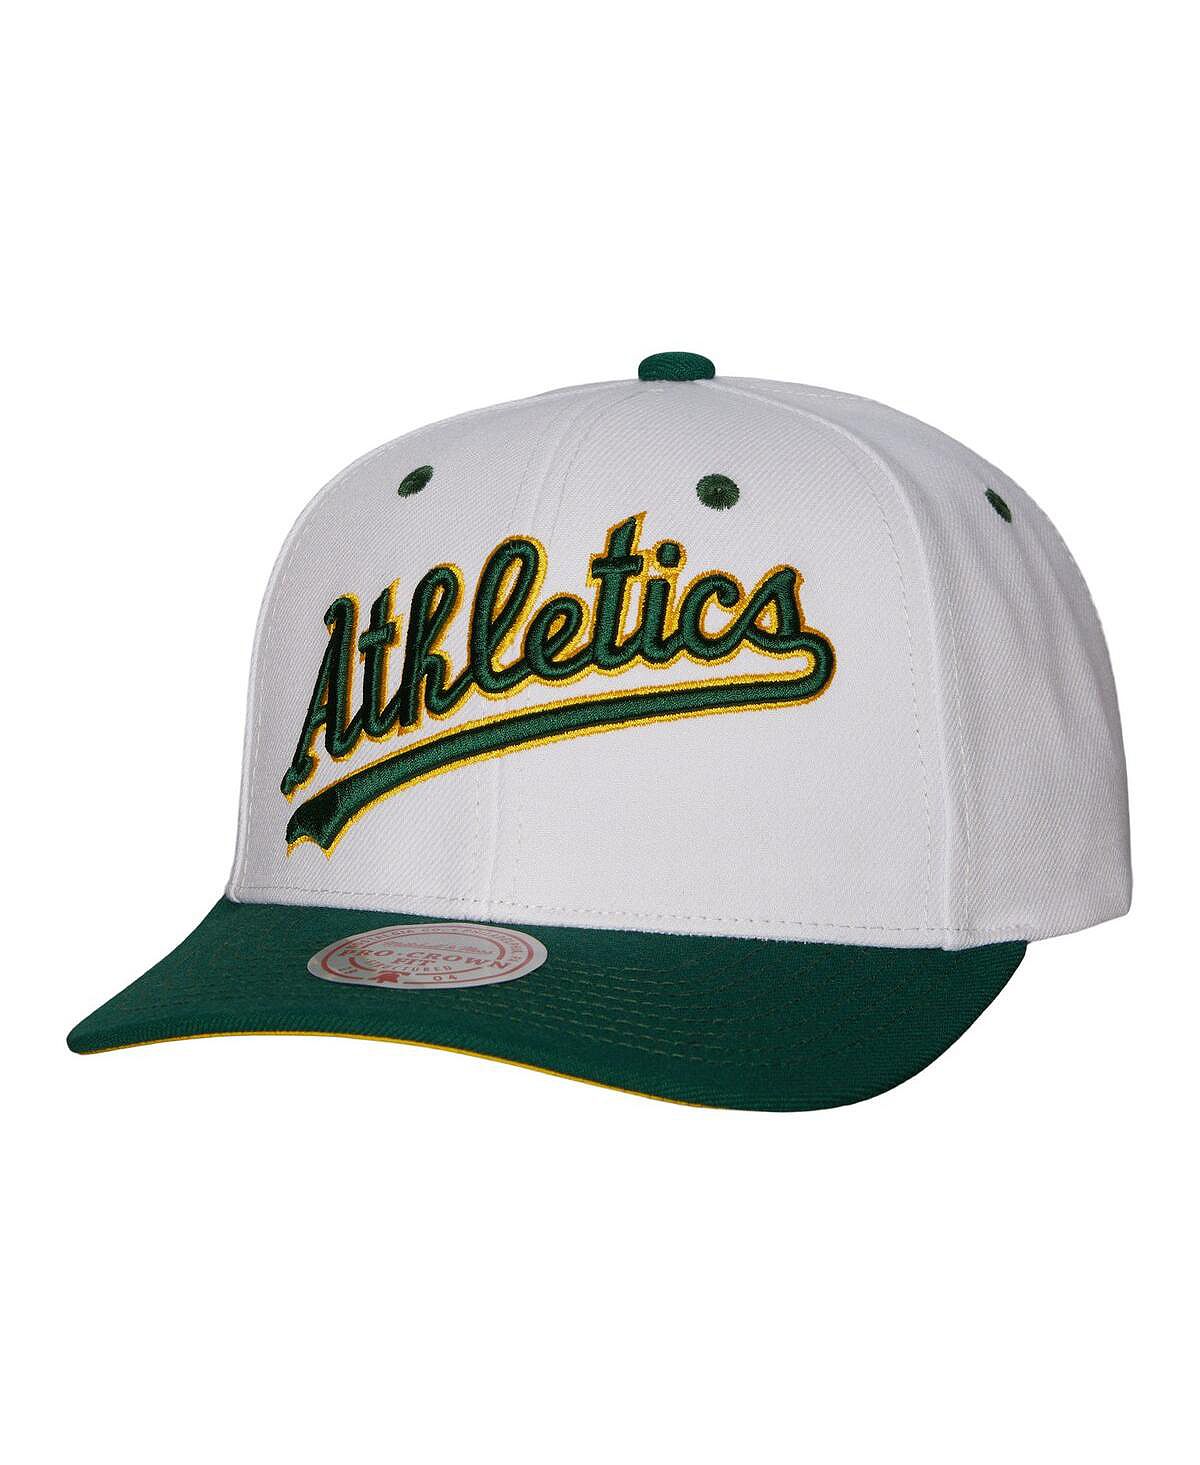 Мужская белая кепка Oakland Athletics Cooperstown Collection Pro Crown Snapback Mitchell & Ness мужская кремовая футболка oakland athletics cooperstown collection old english pro standard